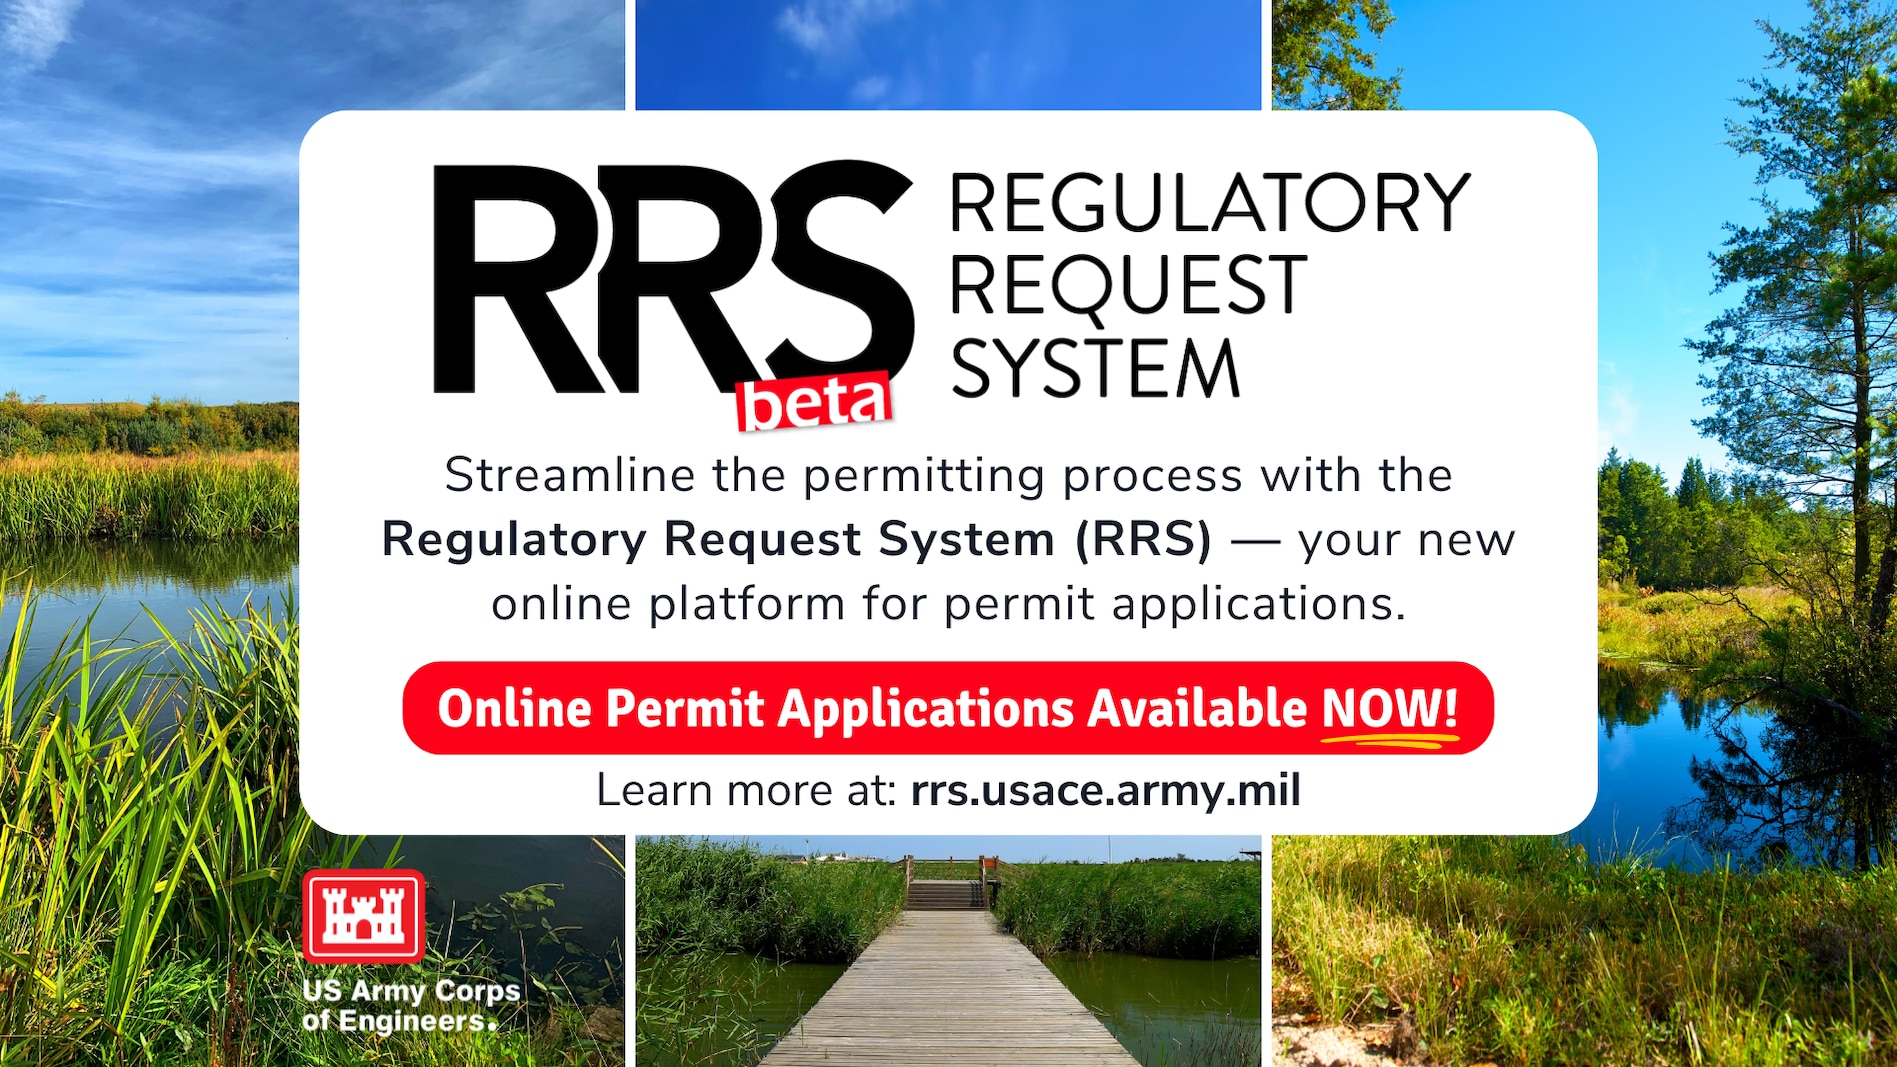 The U.S. Army Corps of Engineers is introducing its new Regulatory Request System, an online application portal that allows the public to submit permit applications and other information when requesting permission to dredge, fill or conduct activities in jurisdictional wetlands and waters of the U.S. RRS is available at https://rrs.usace.army.mil/rrs.

RRS users can now submit individual permit applications, general permit pre-construction notifications, jurisdictional determination requests, and other information needed during the permit evaluation process using easy-to-follow online submission forms. Applicants will also be able to track the status of their requests using a user-friendly dashboard.